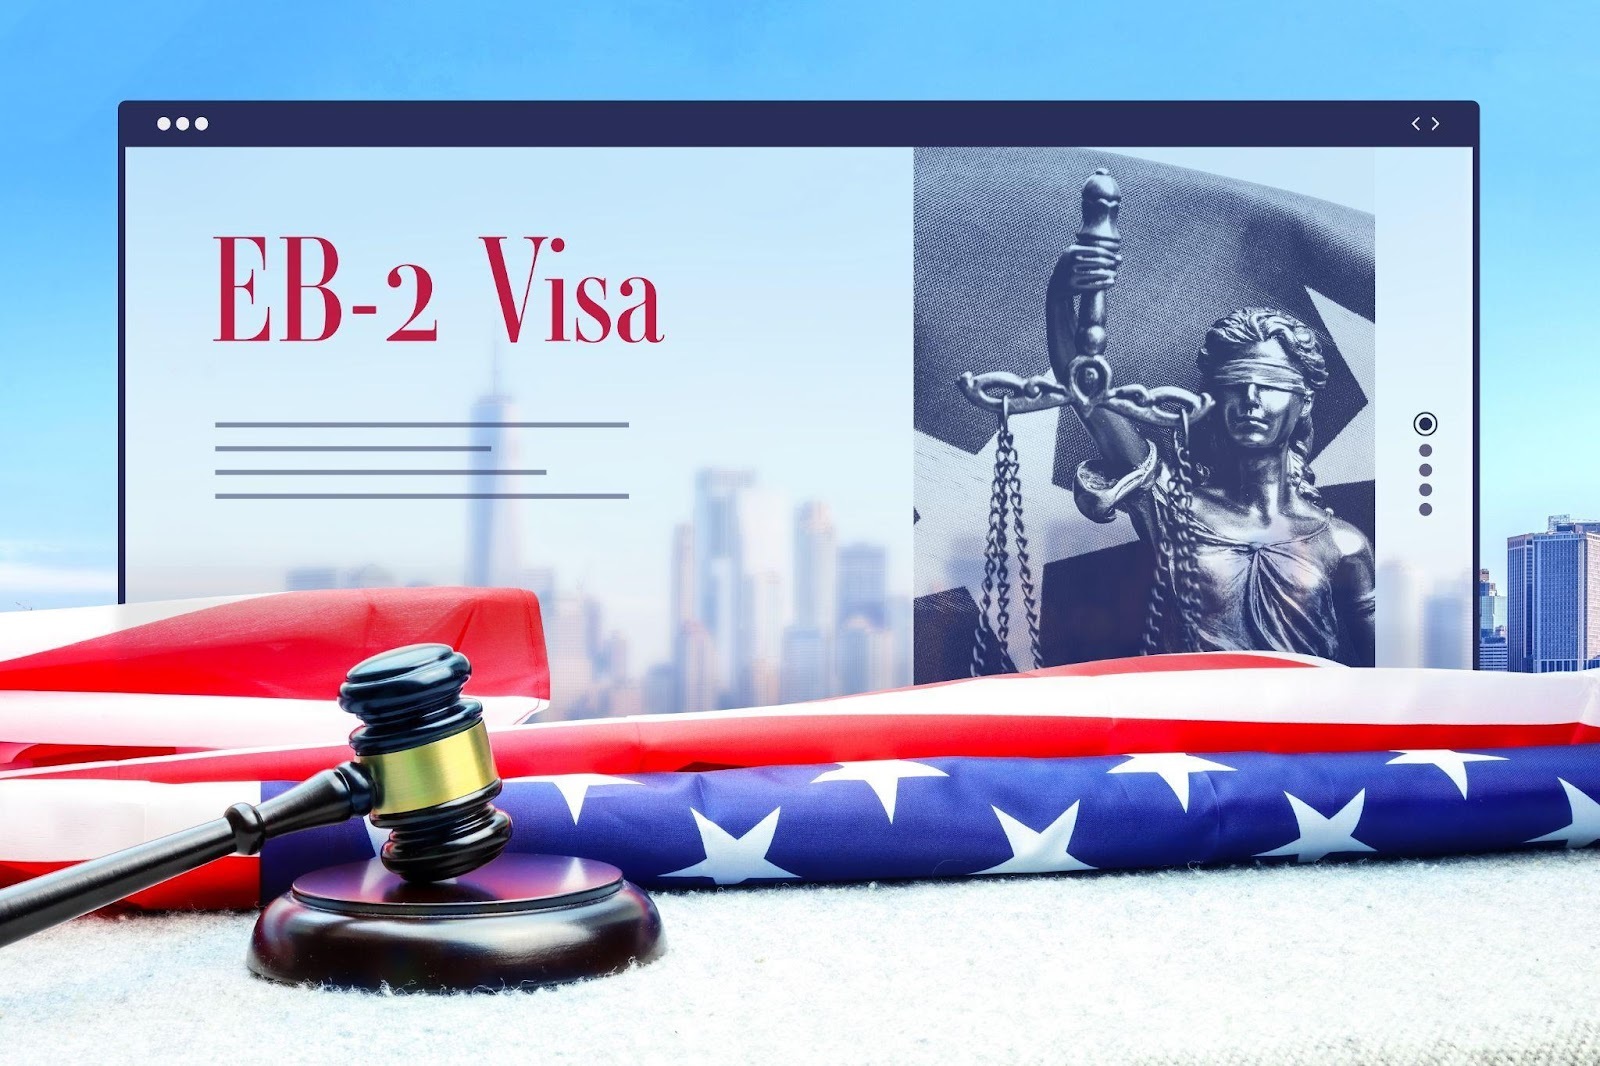 E-2 visa for American citizens, allowing investment in US businesses